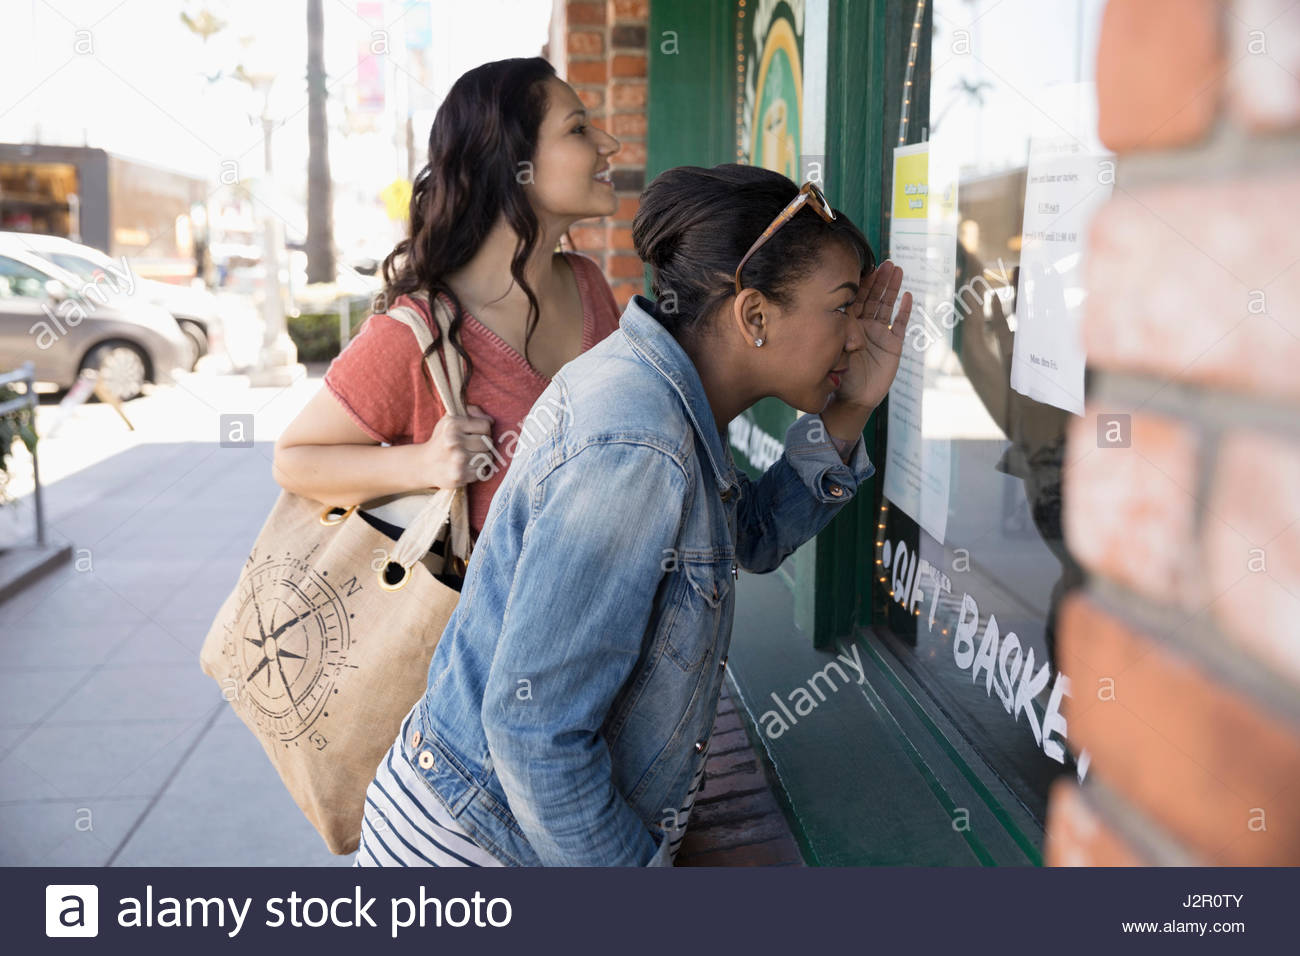 Women friends window shopping at storefront Stock Photo